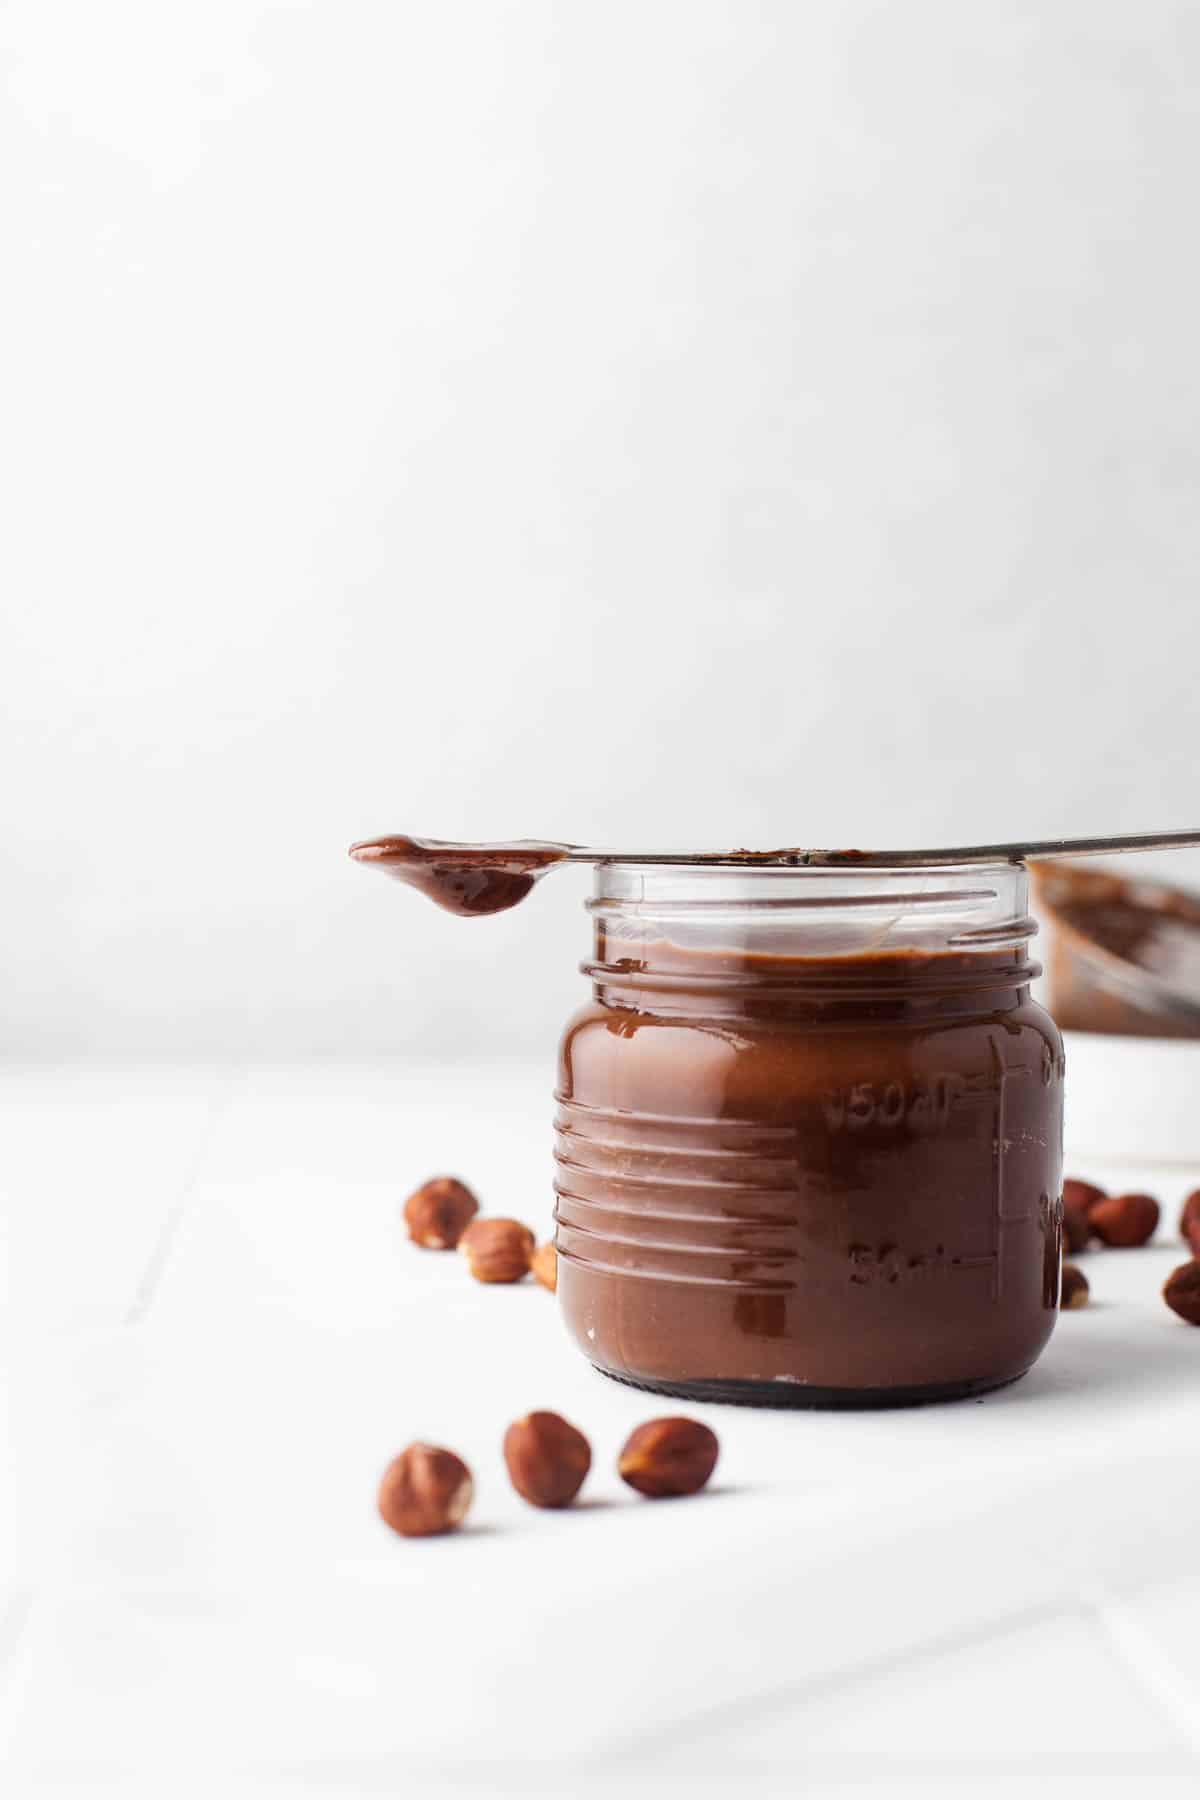 A knife dripping homemade Nutella set on top of a jar of the creamy spread.